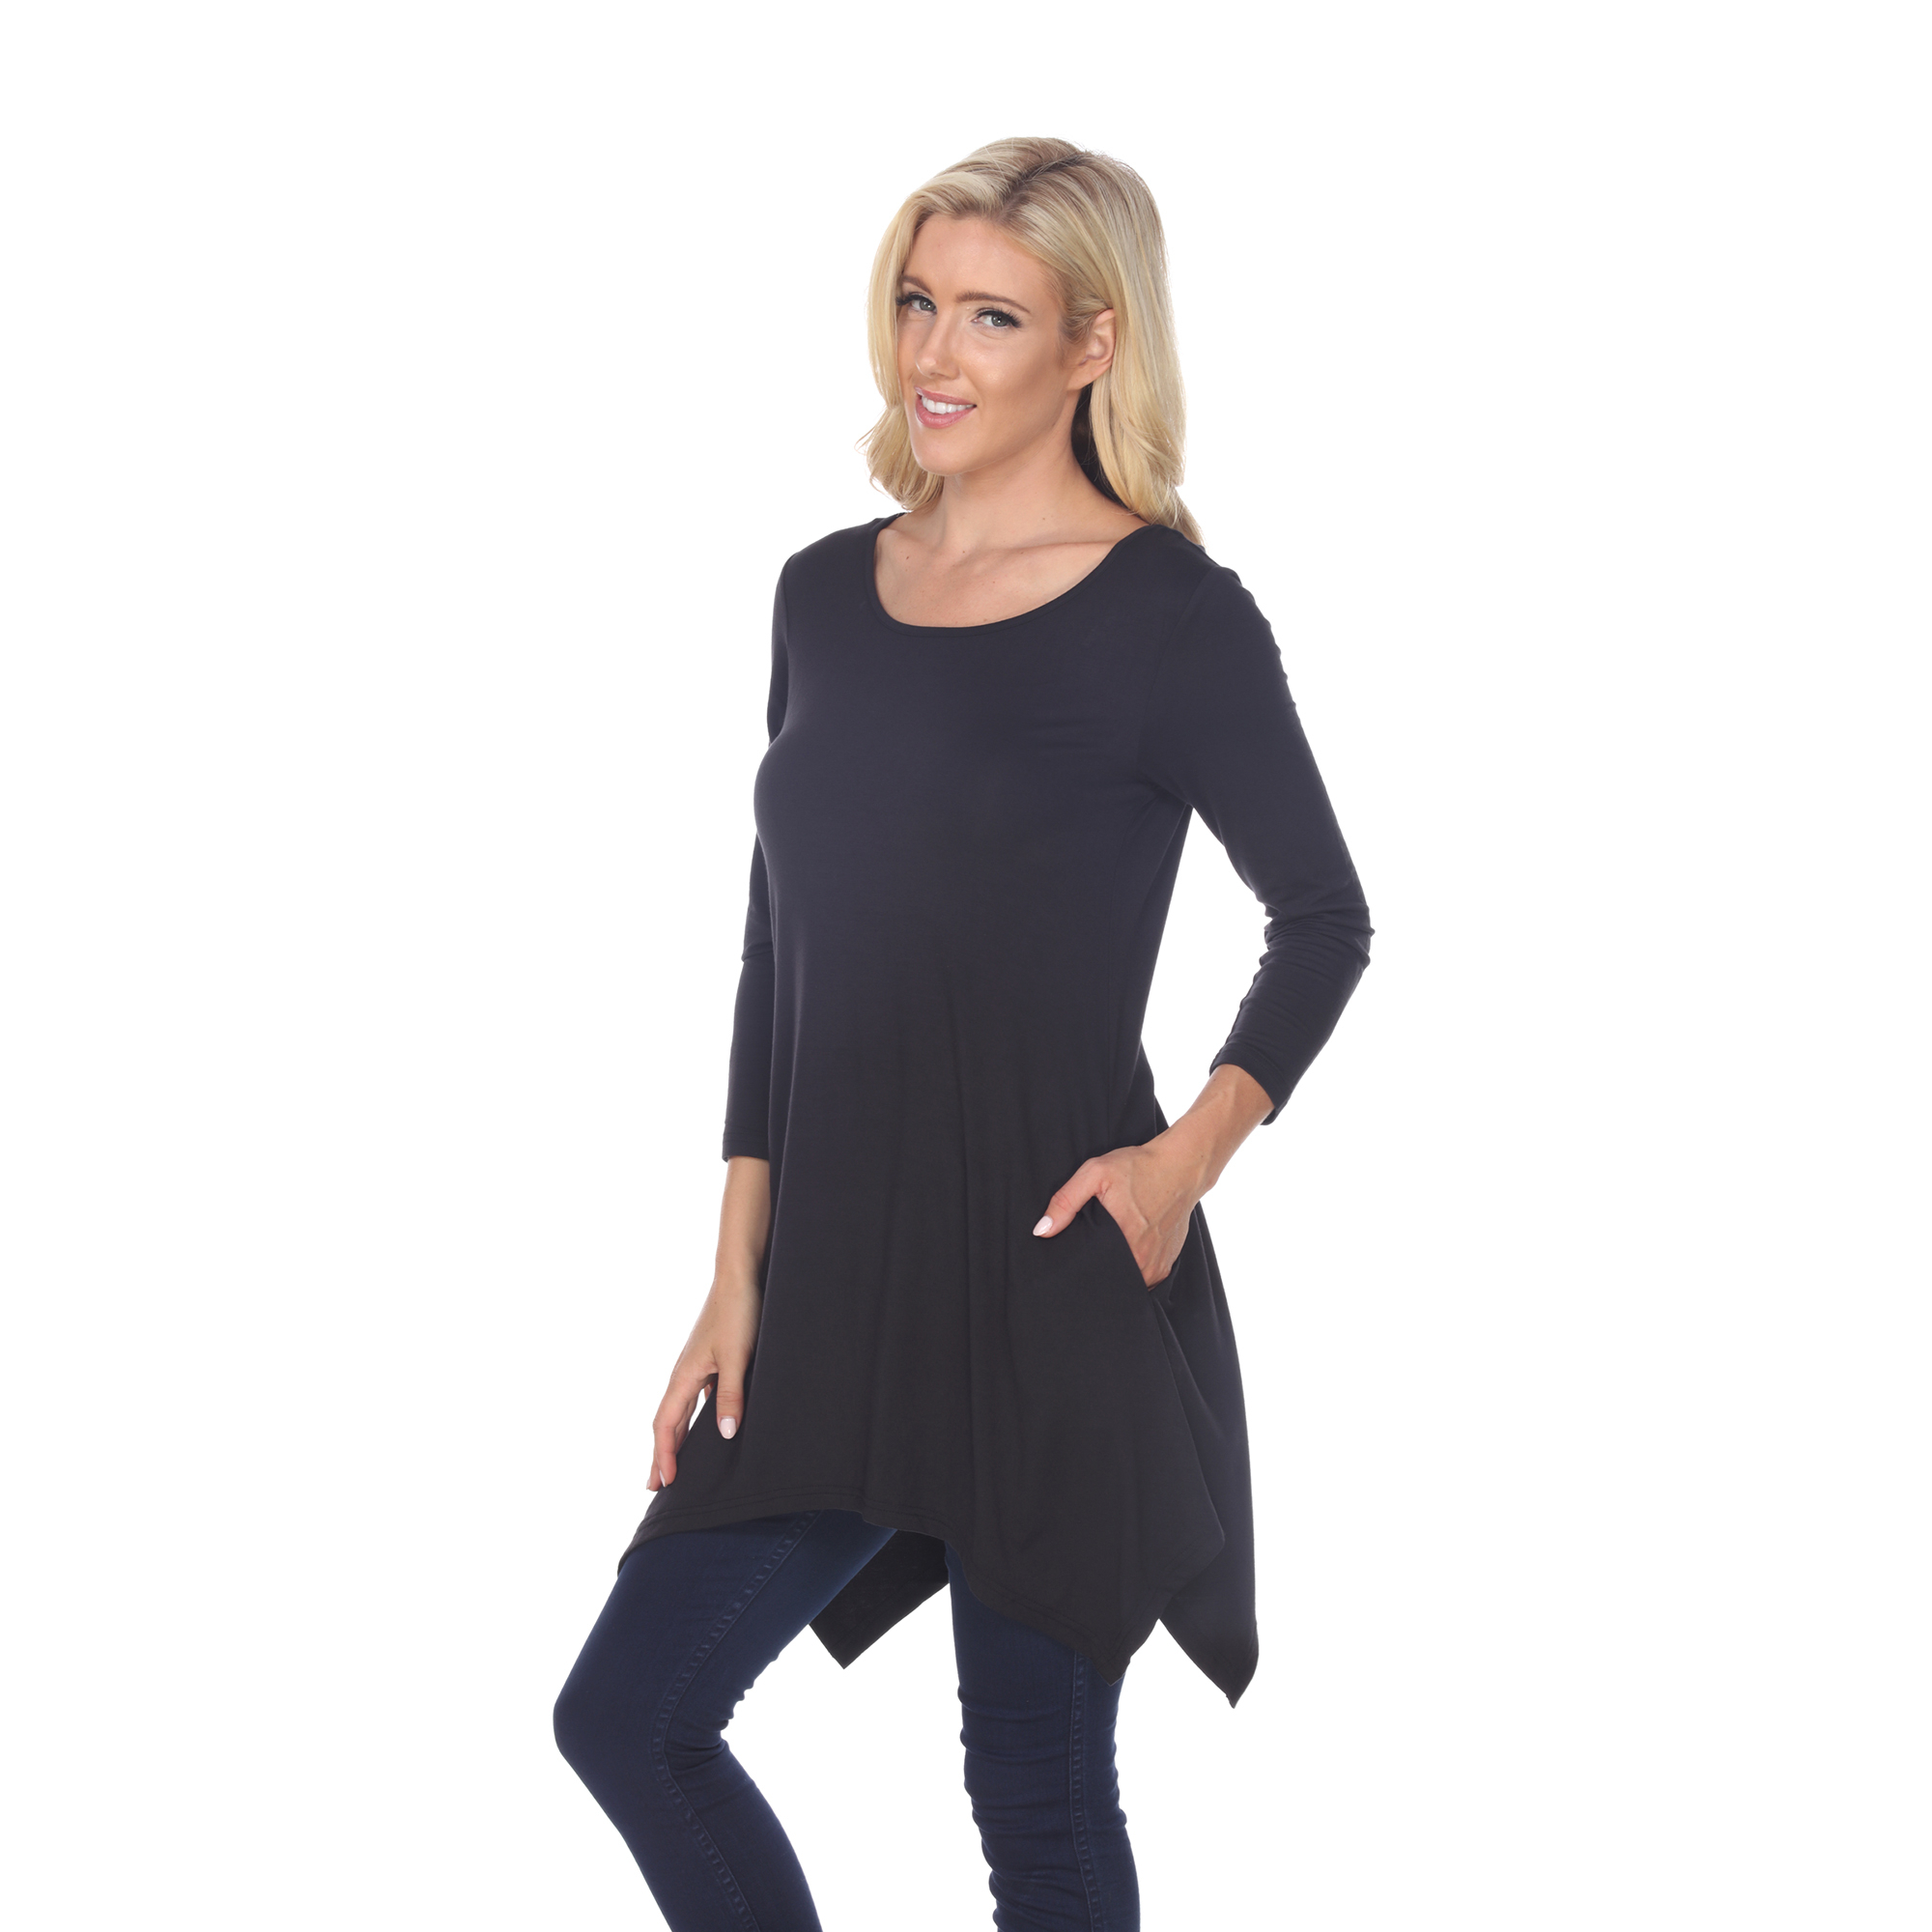 White Mark Women's Quarter Sleeve Tunic Top With Pockets - Navy, X-Large